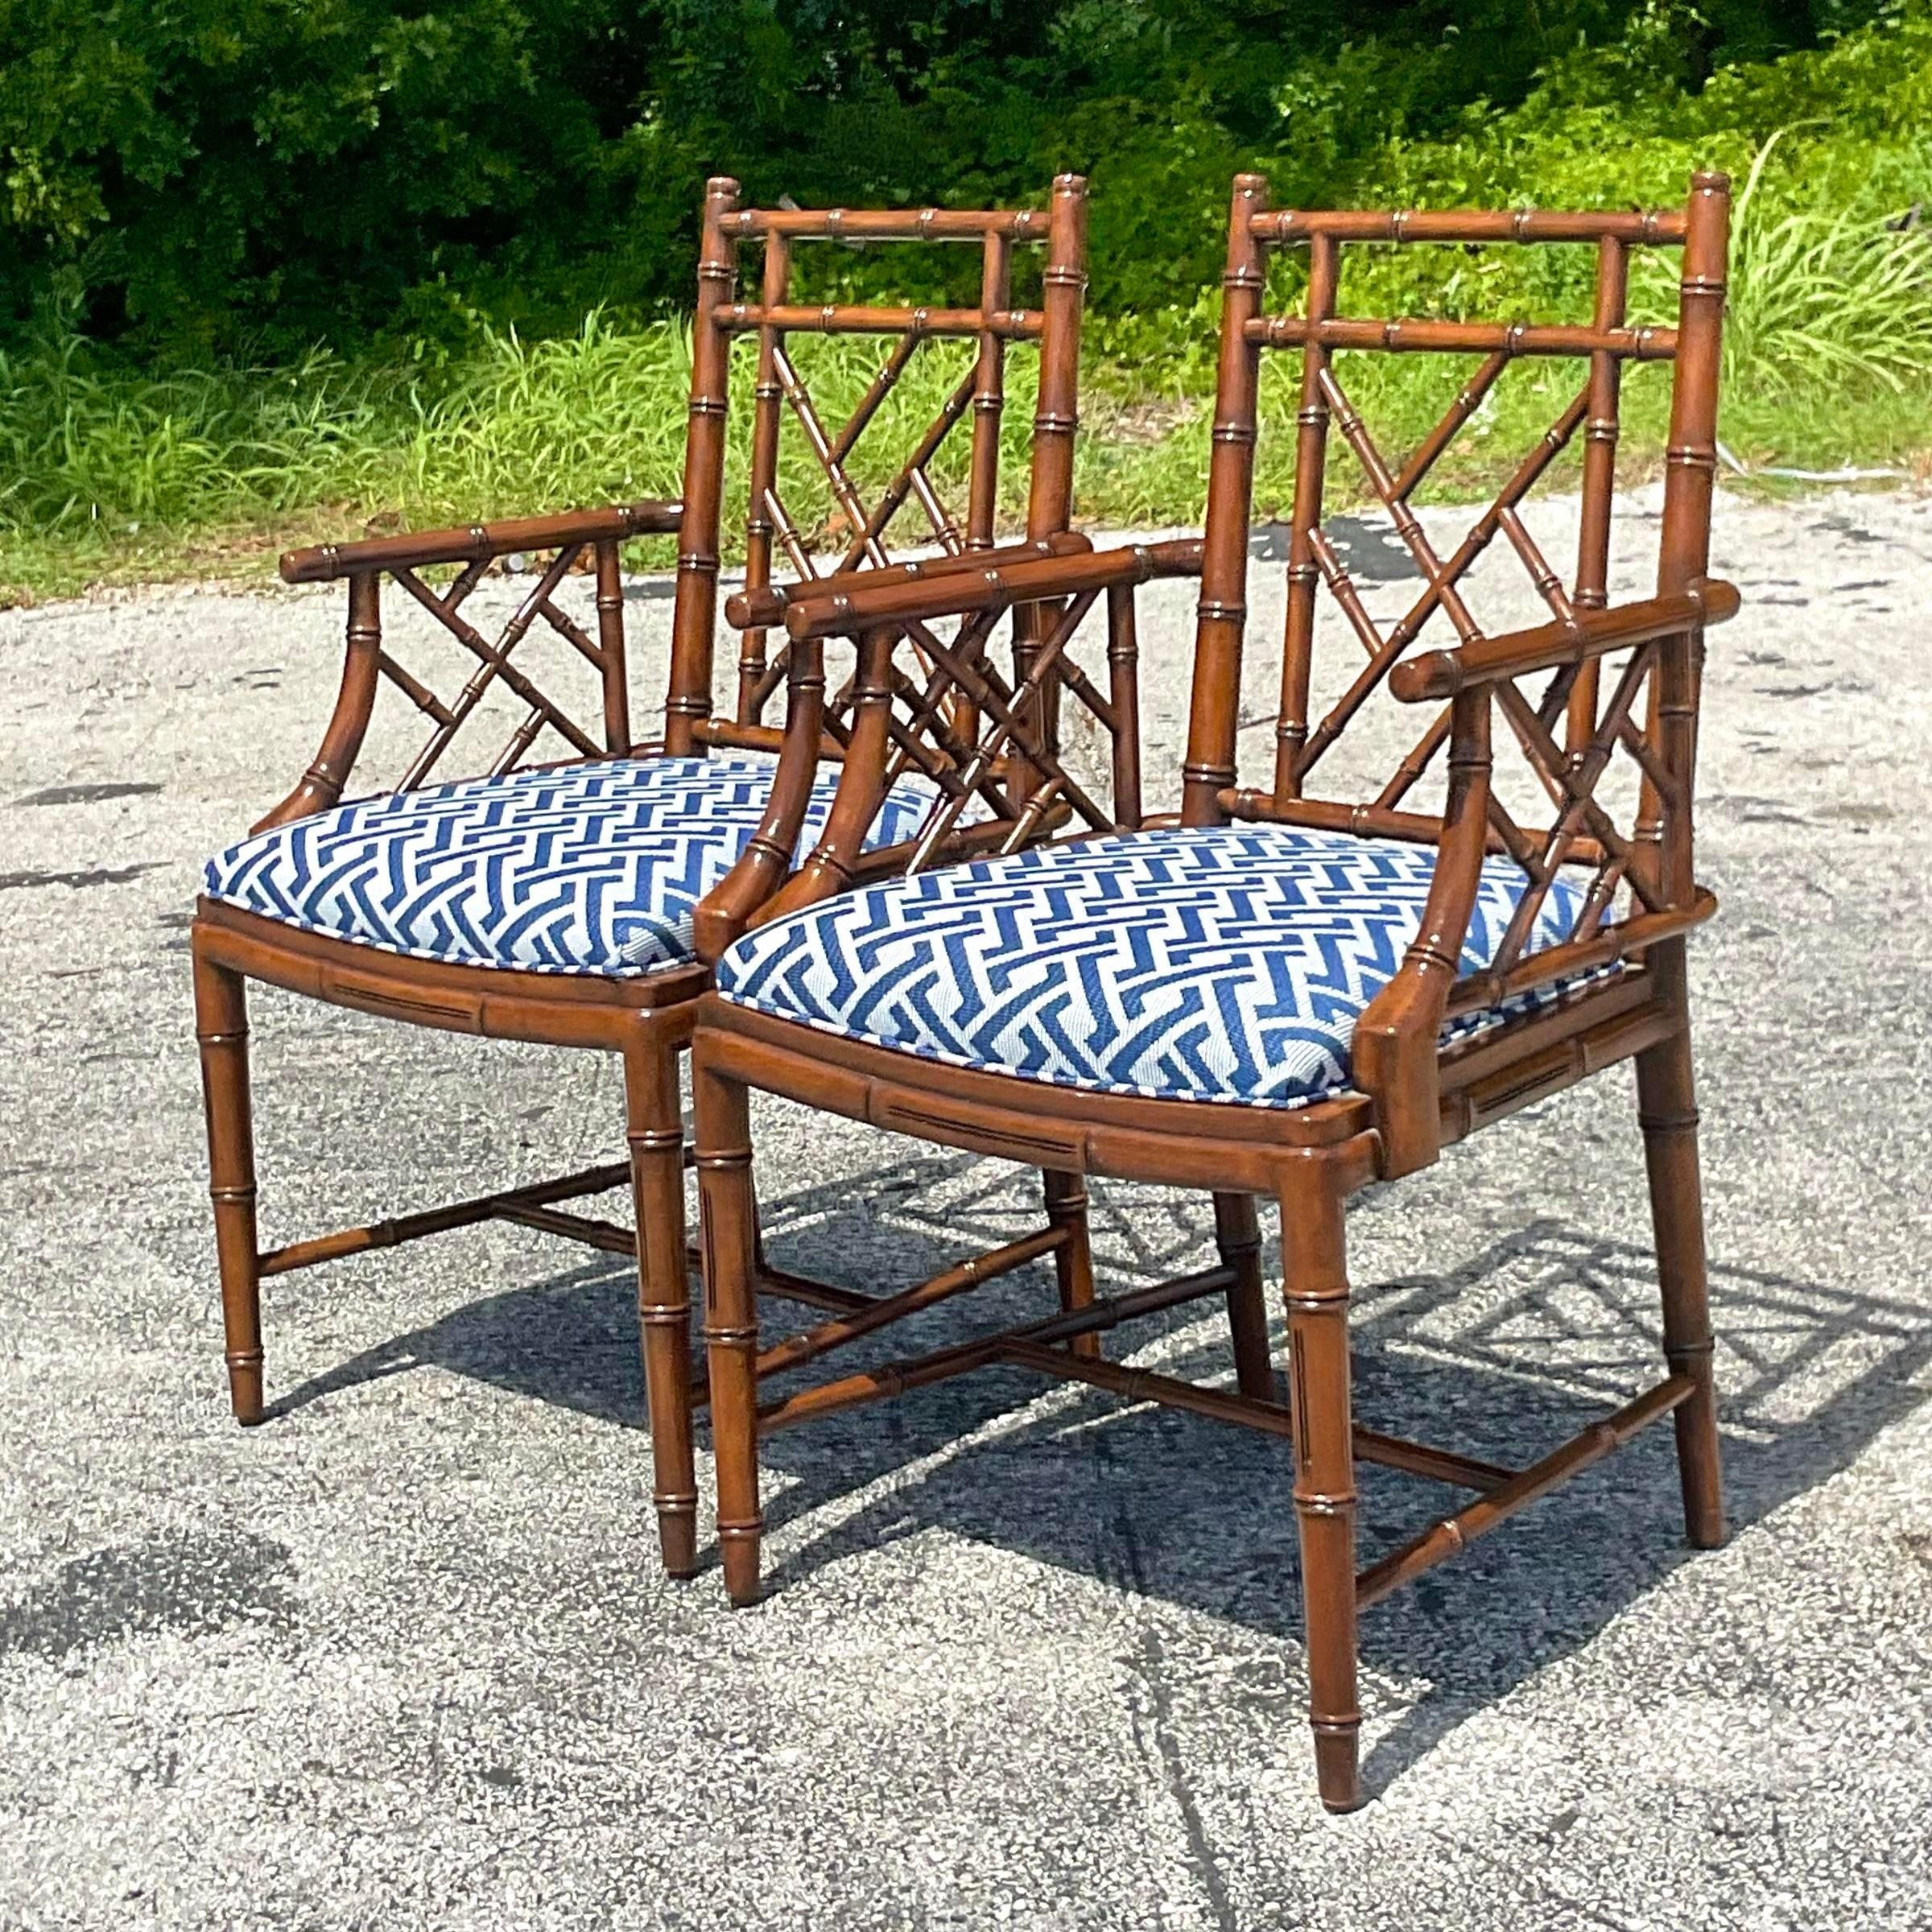 Vintage Regency William Switzer Chinese Chippendale Arm Chairs - a Pair For Sale 1